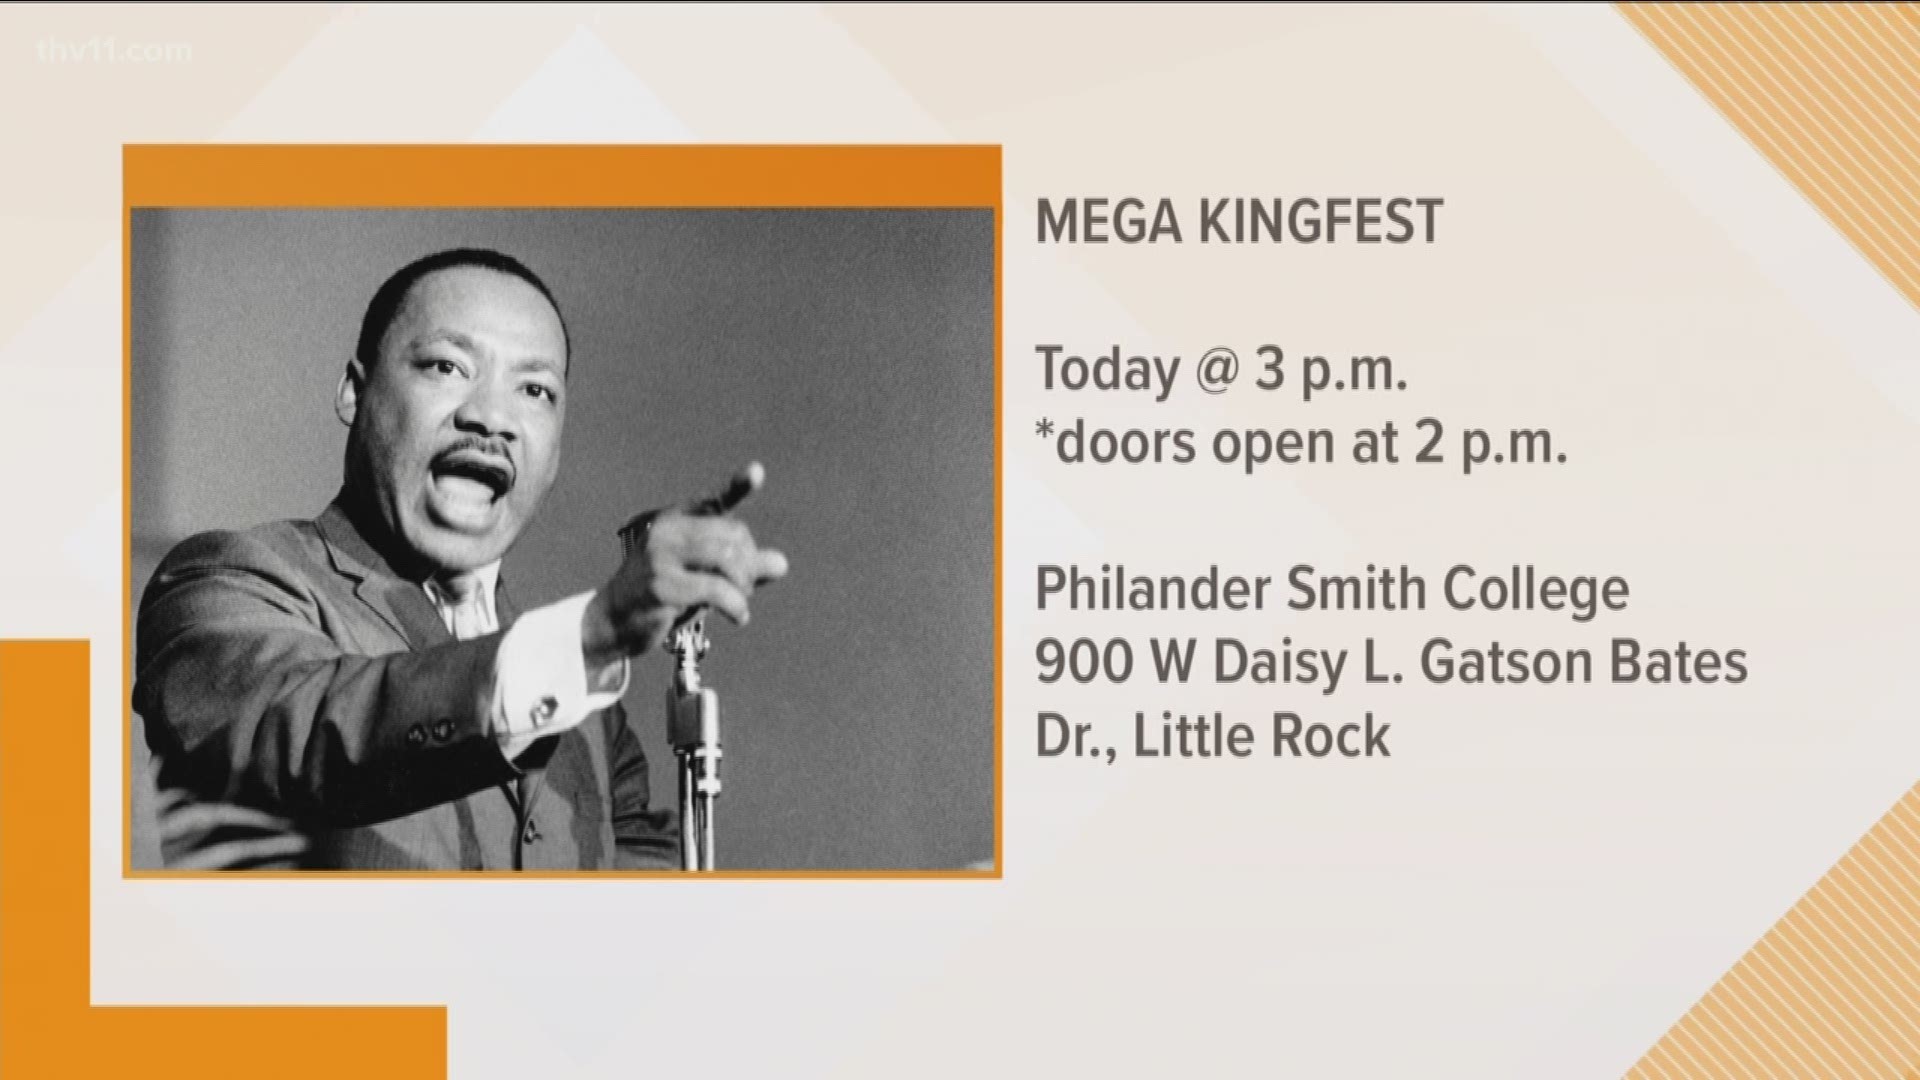 Mega Kingfest is a celebration of the legacy of Dr. Martin Luther King Jr. at Philander Smith College from 3-6 p.m.